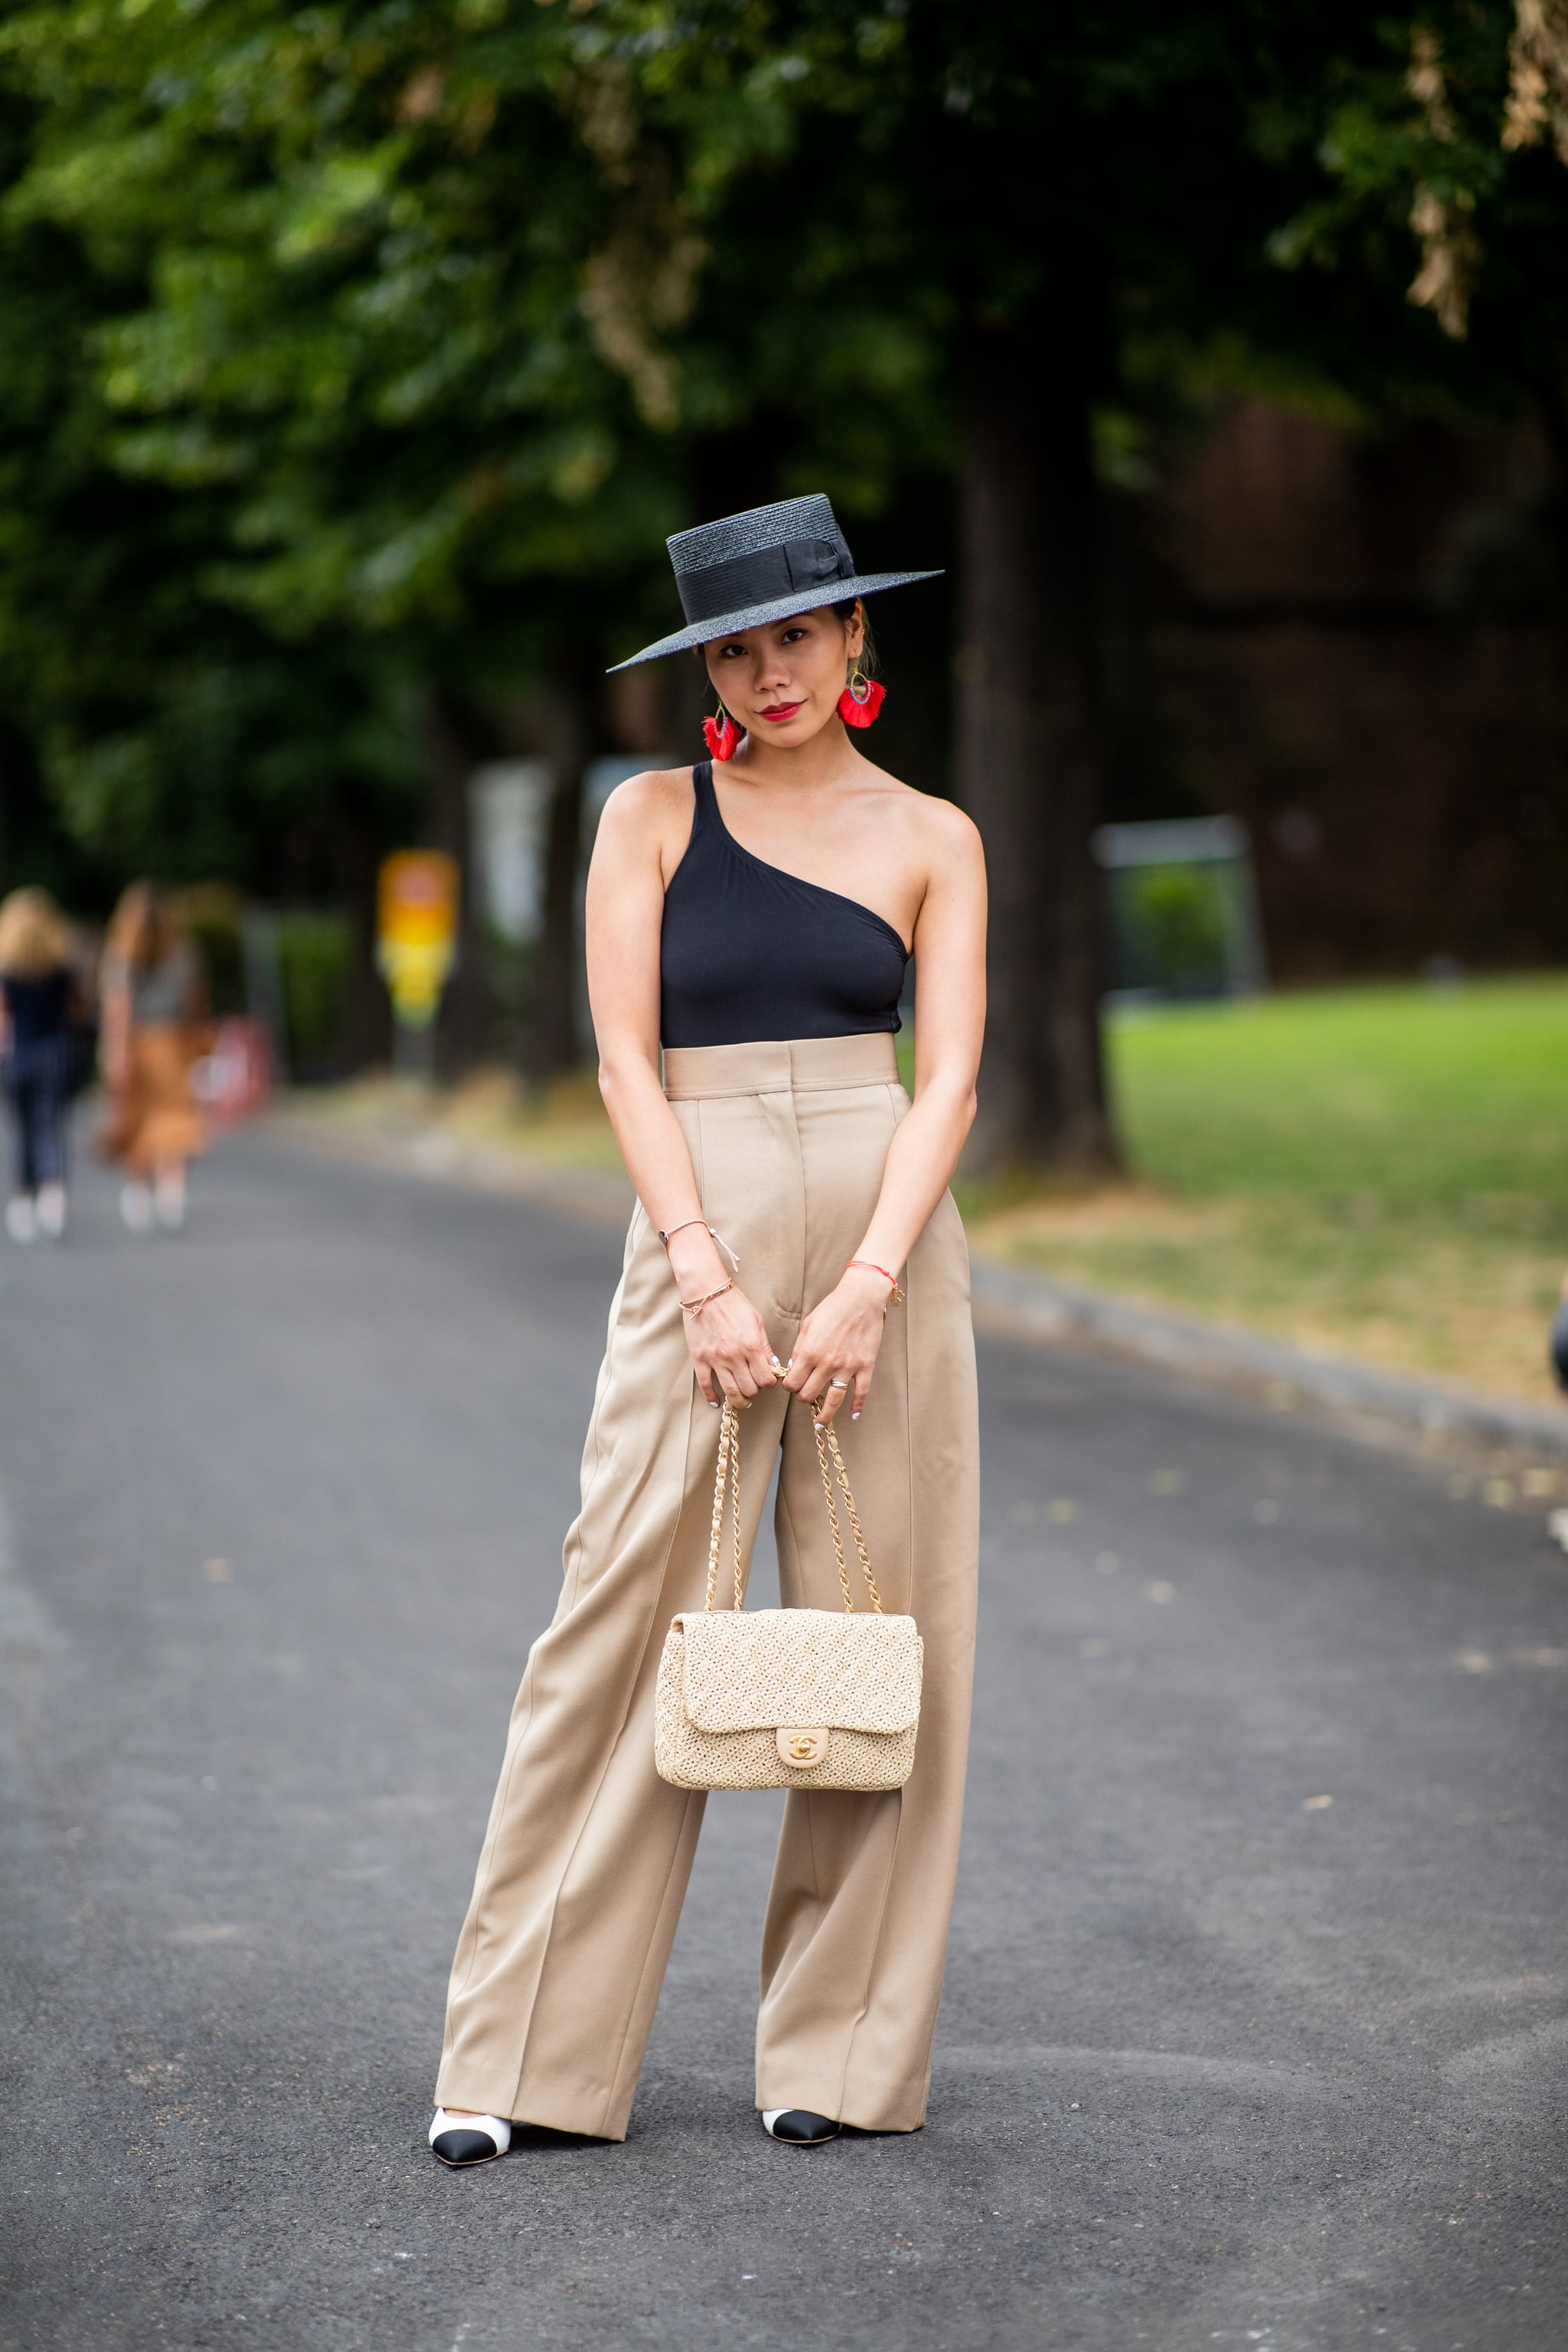 4 Ways to Style High Waisted Tan Trousers